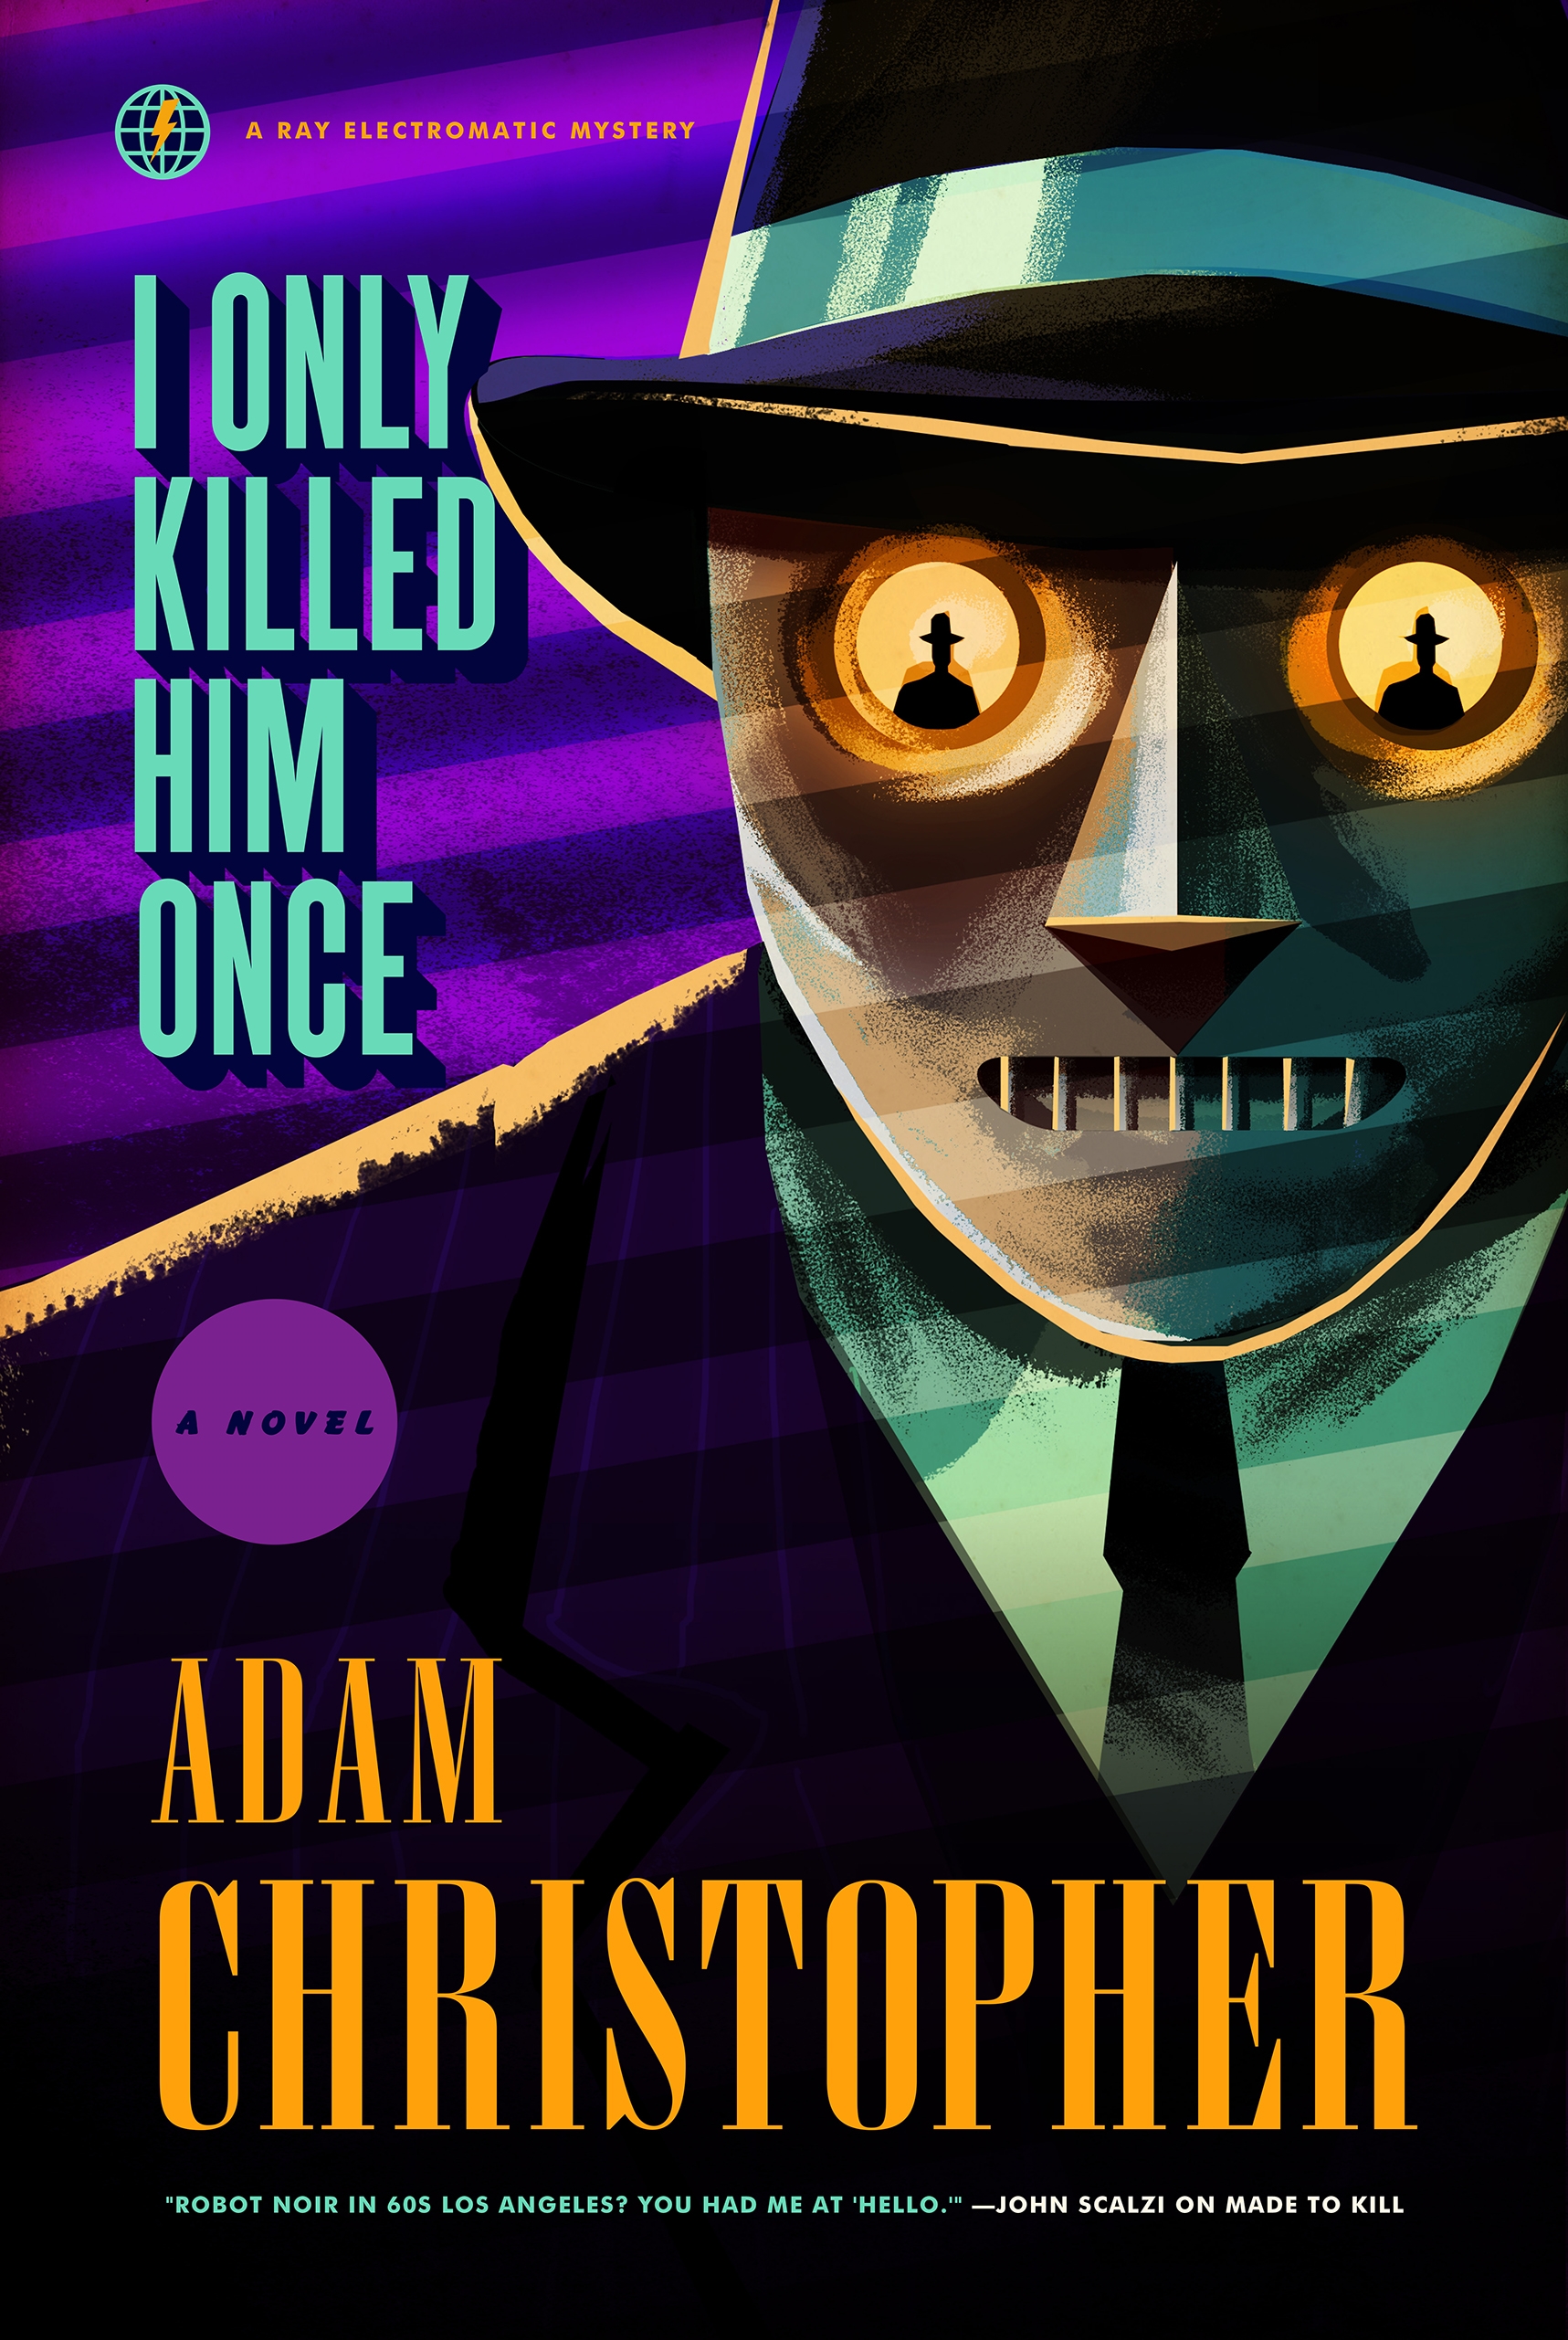 I Only Killed Him Once : A Ray Electromatic Mystery by Adam Christopher